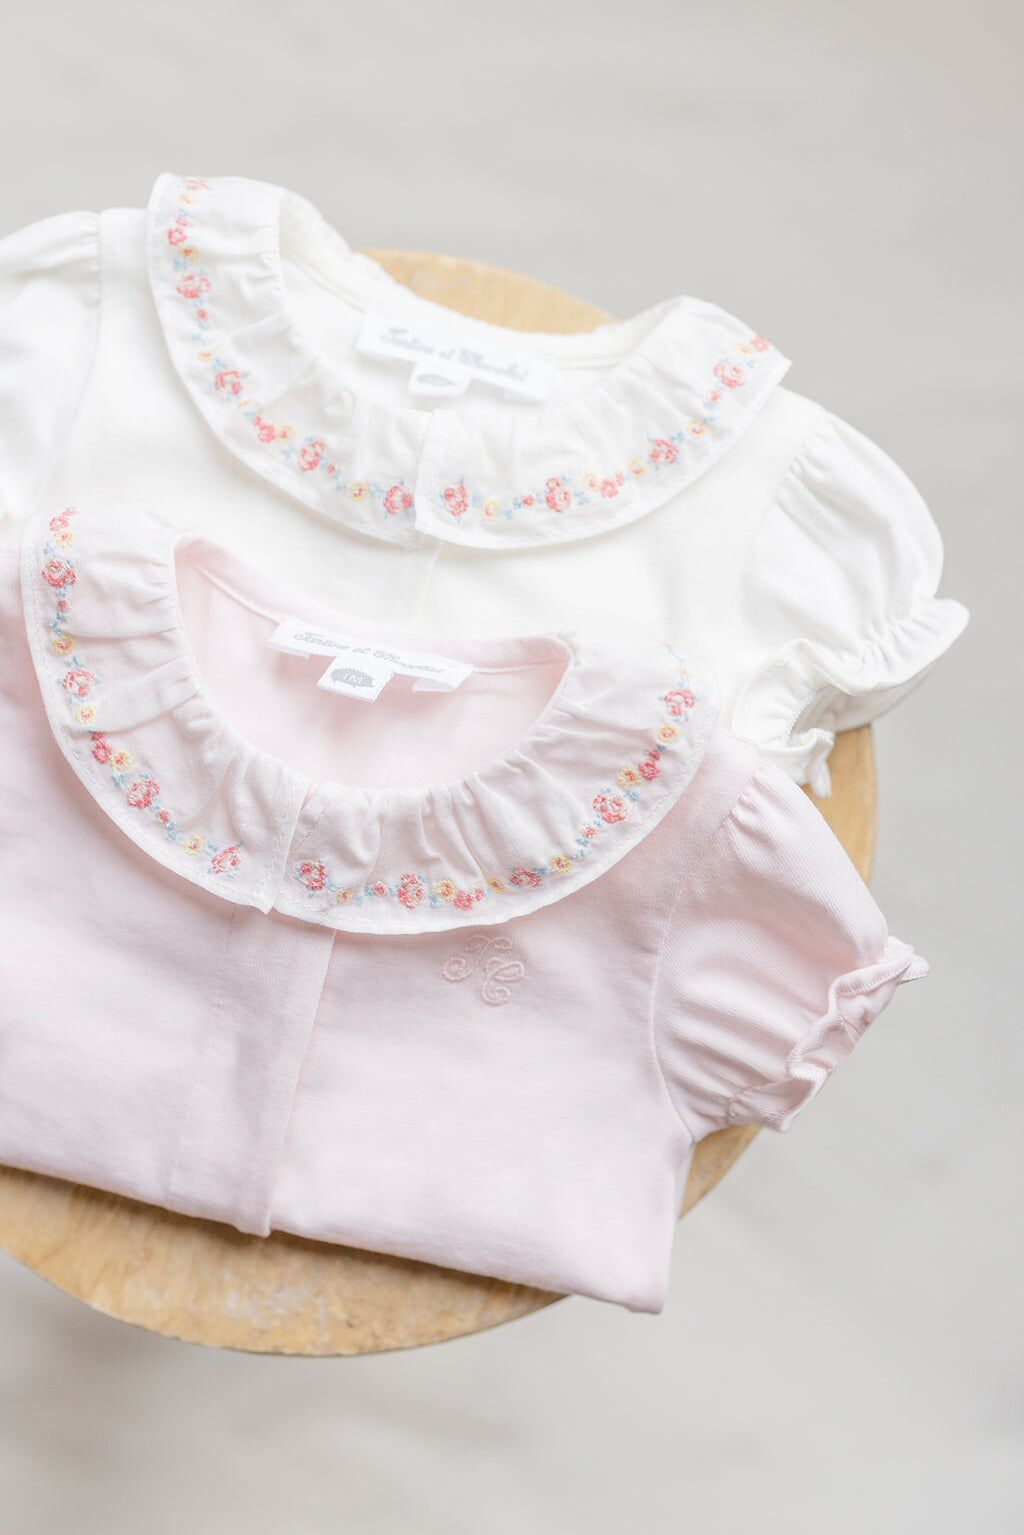 body - Pink Ruffled collar Embroidered